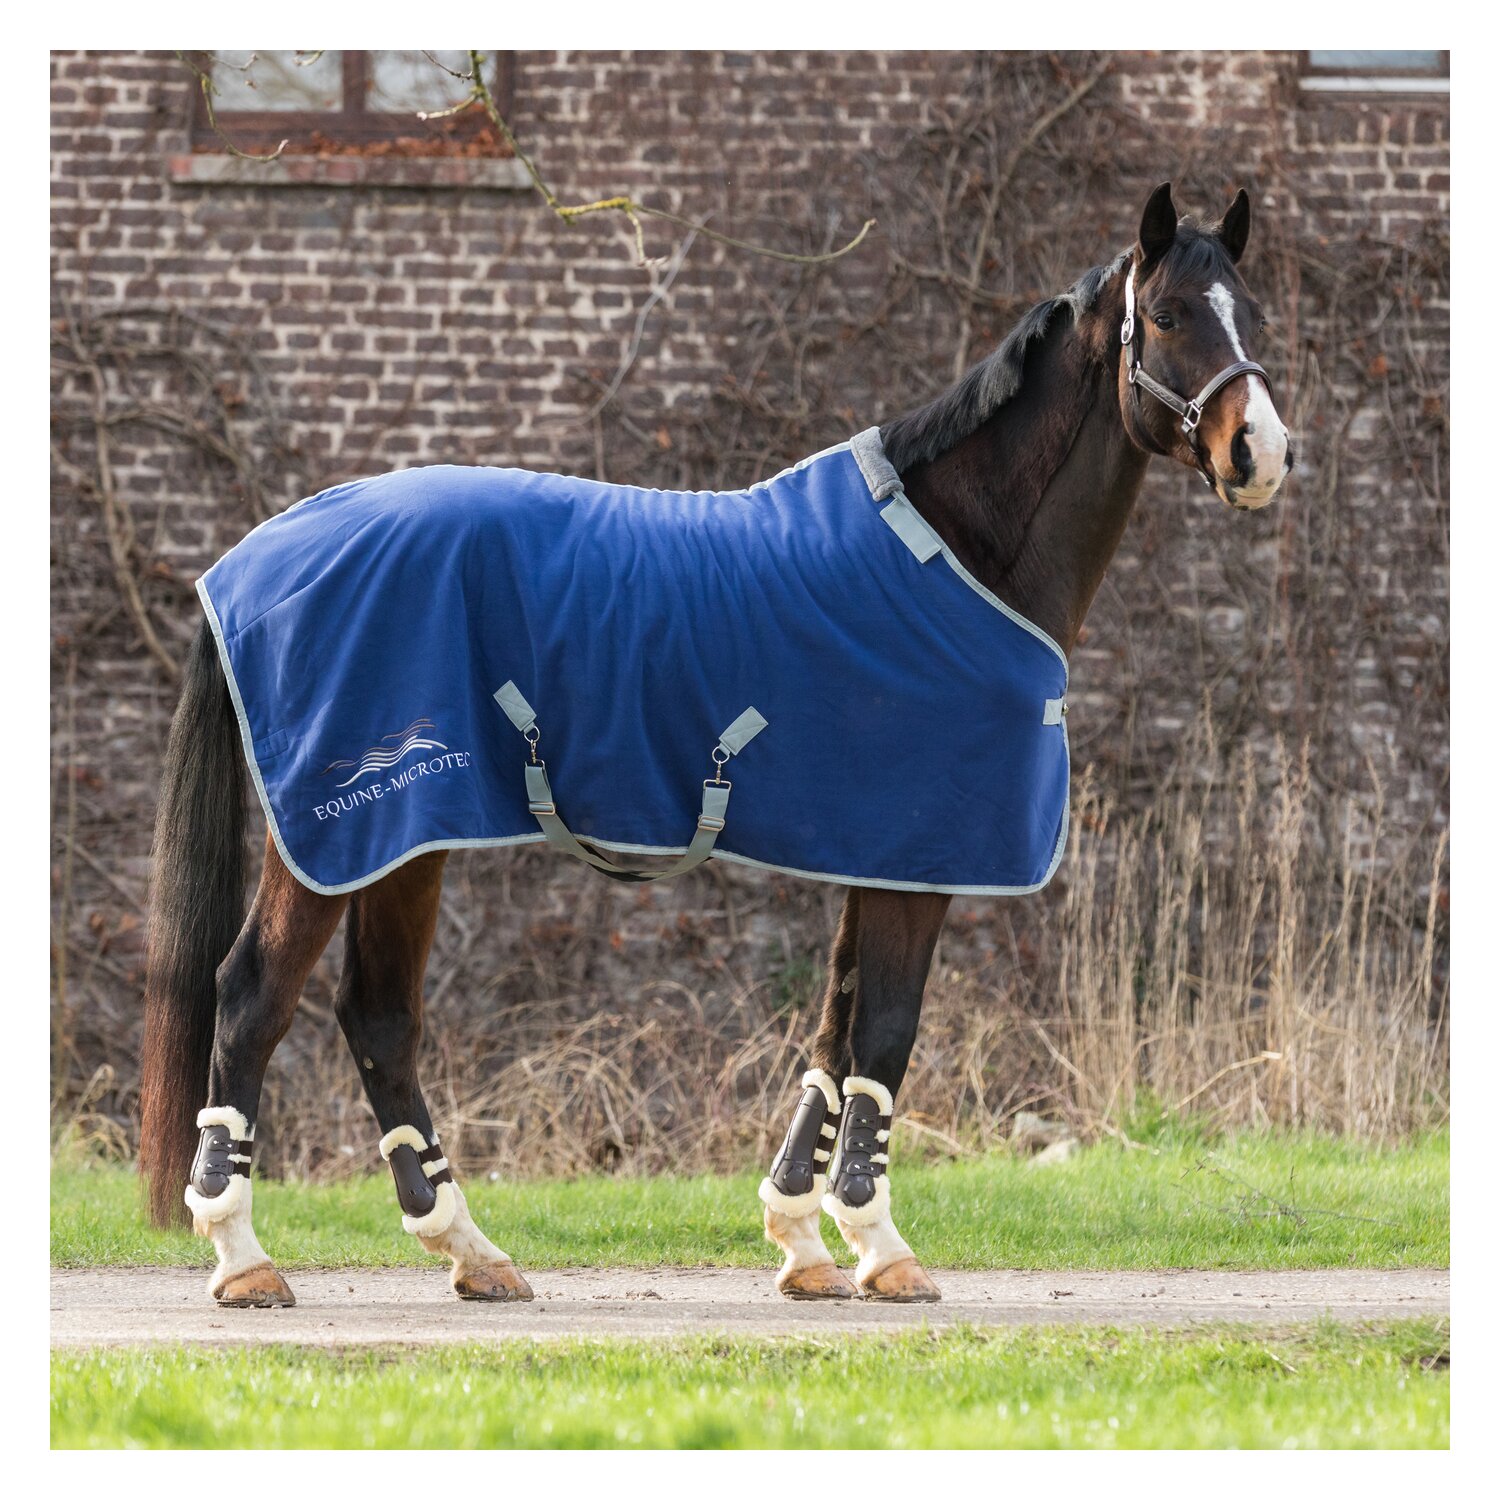 EQUINE-MICROTEC Abschwitzdecke Flanell Touch 